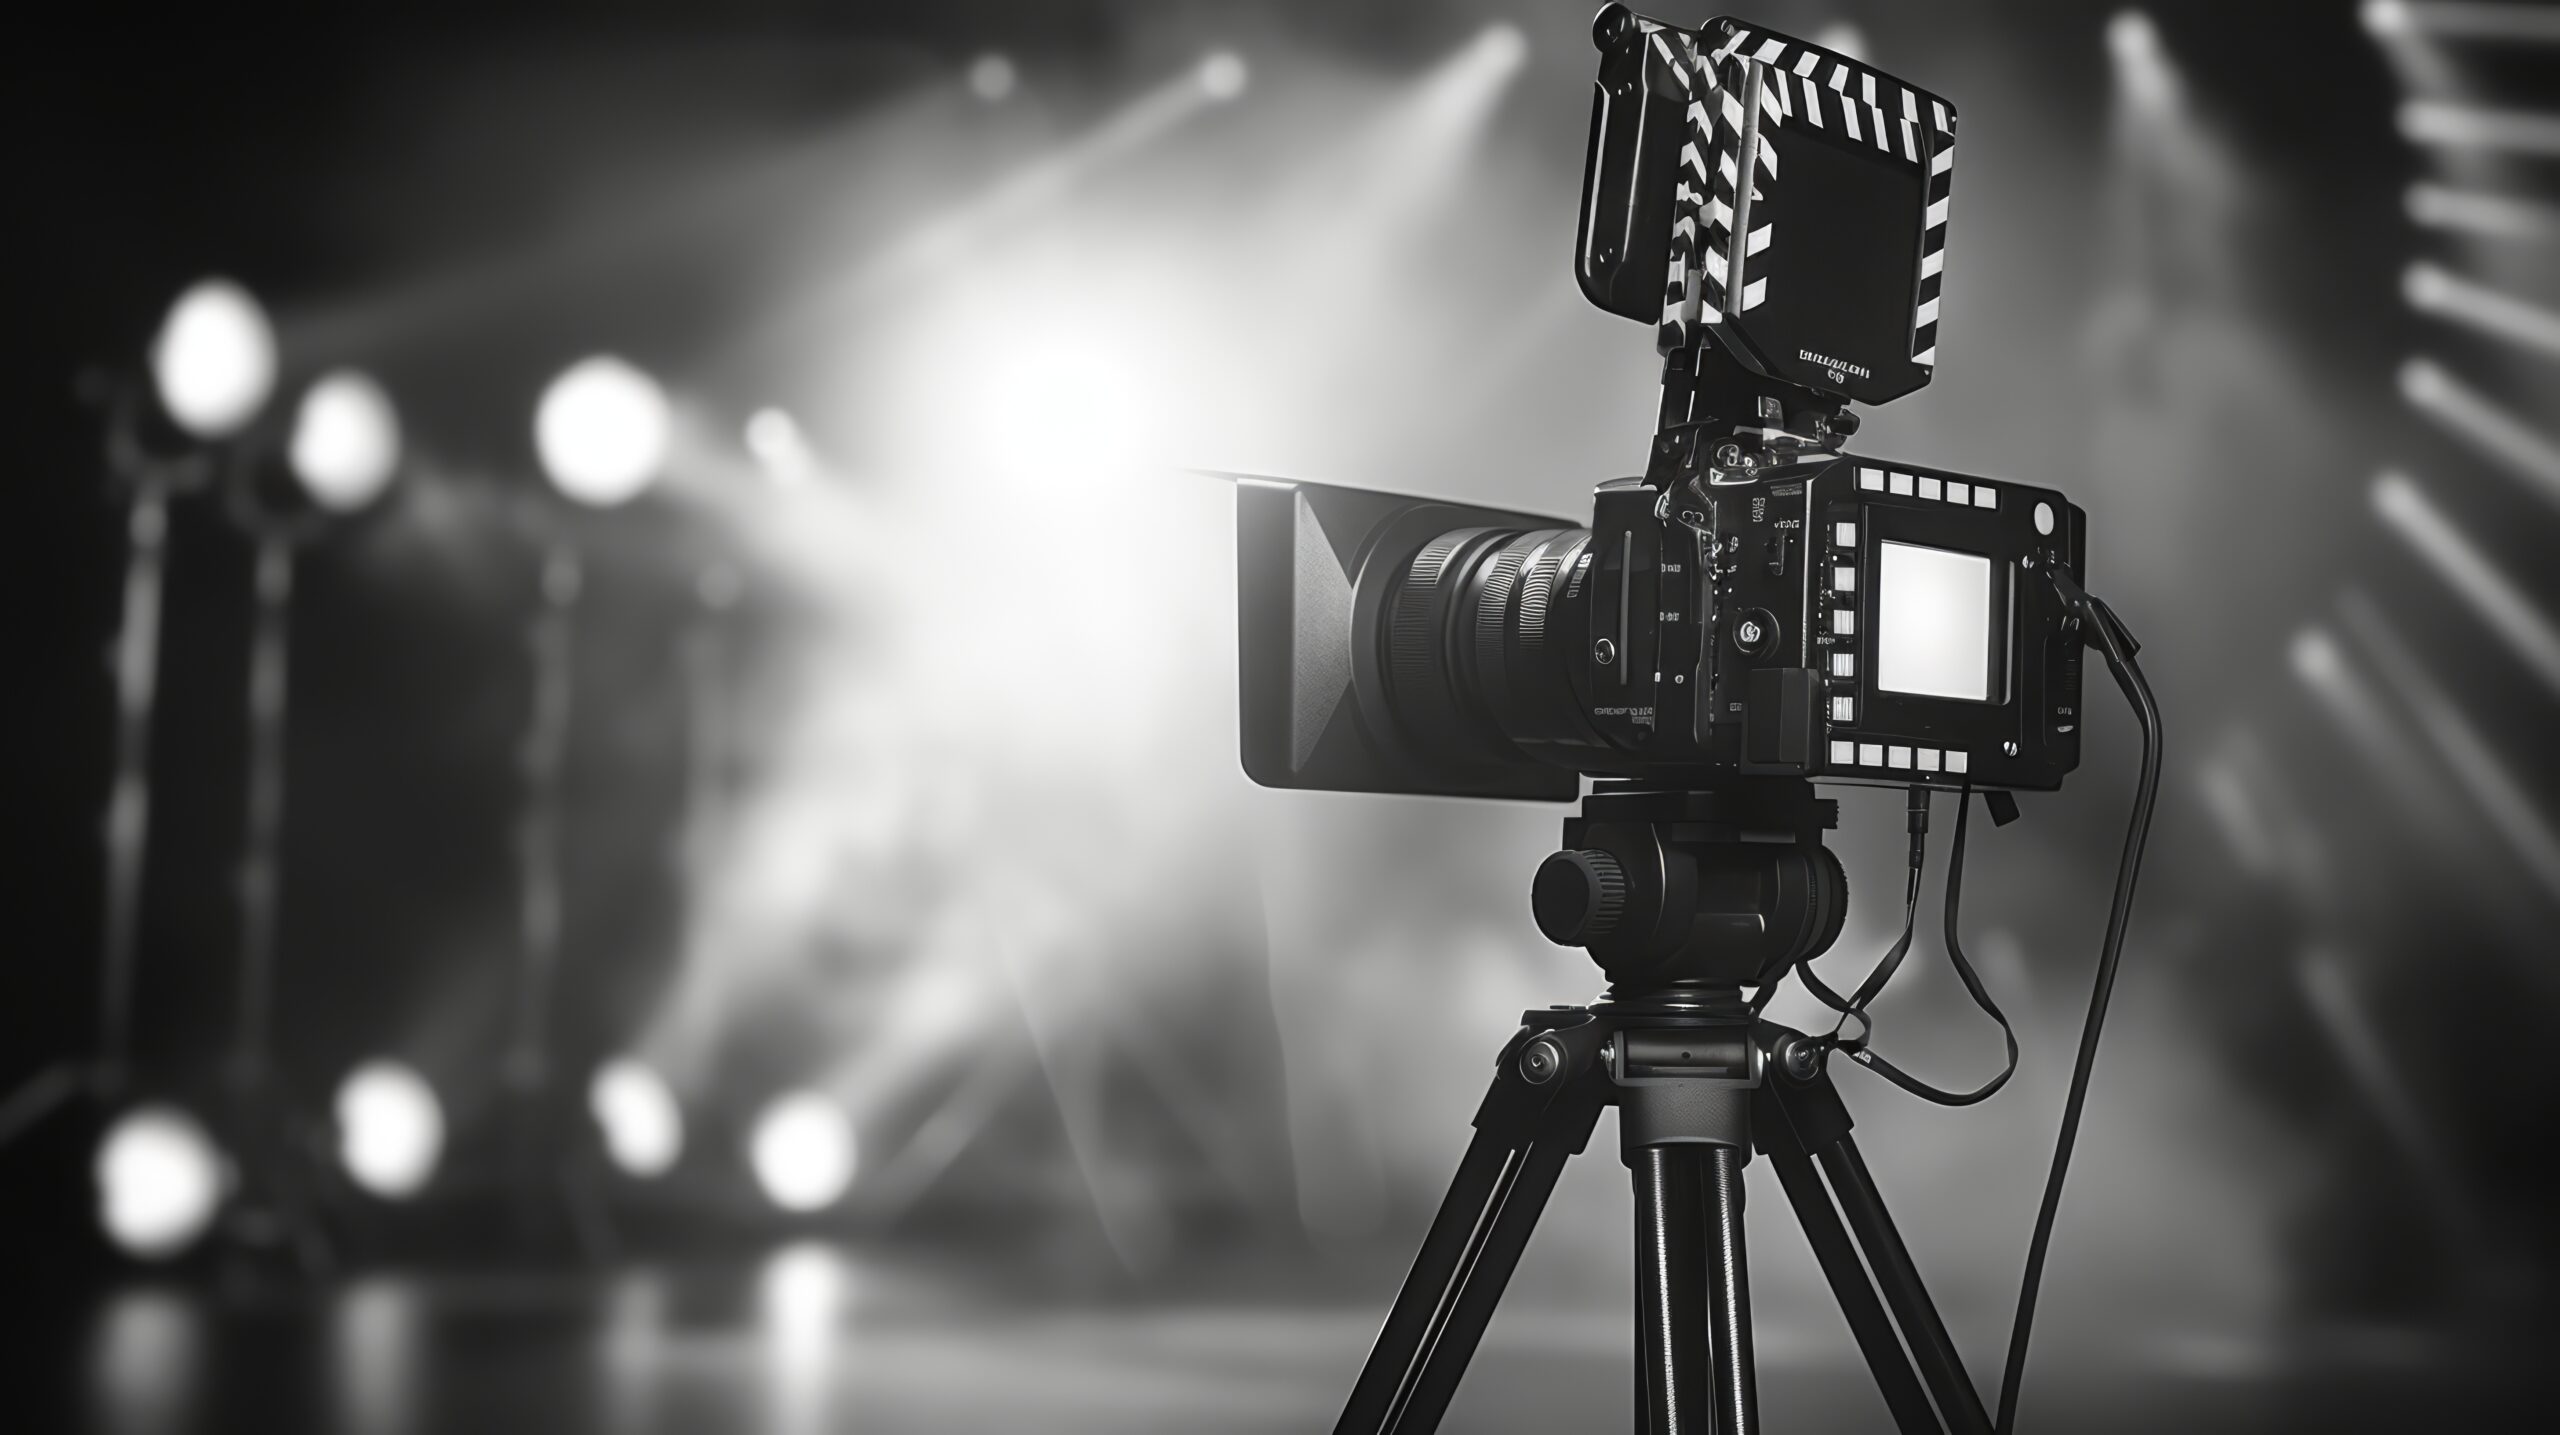 Multiple professional video cameras on tripods filming a concert. Live broadcast and music production theme.